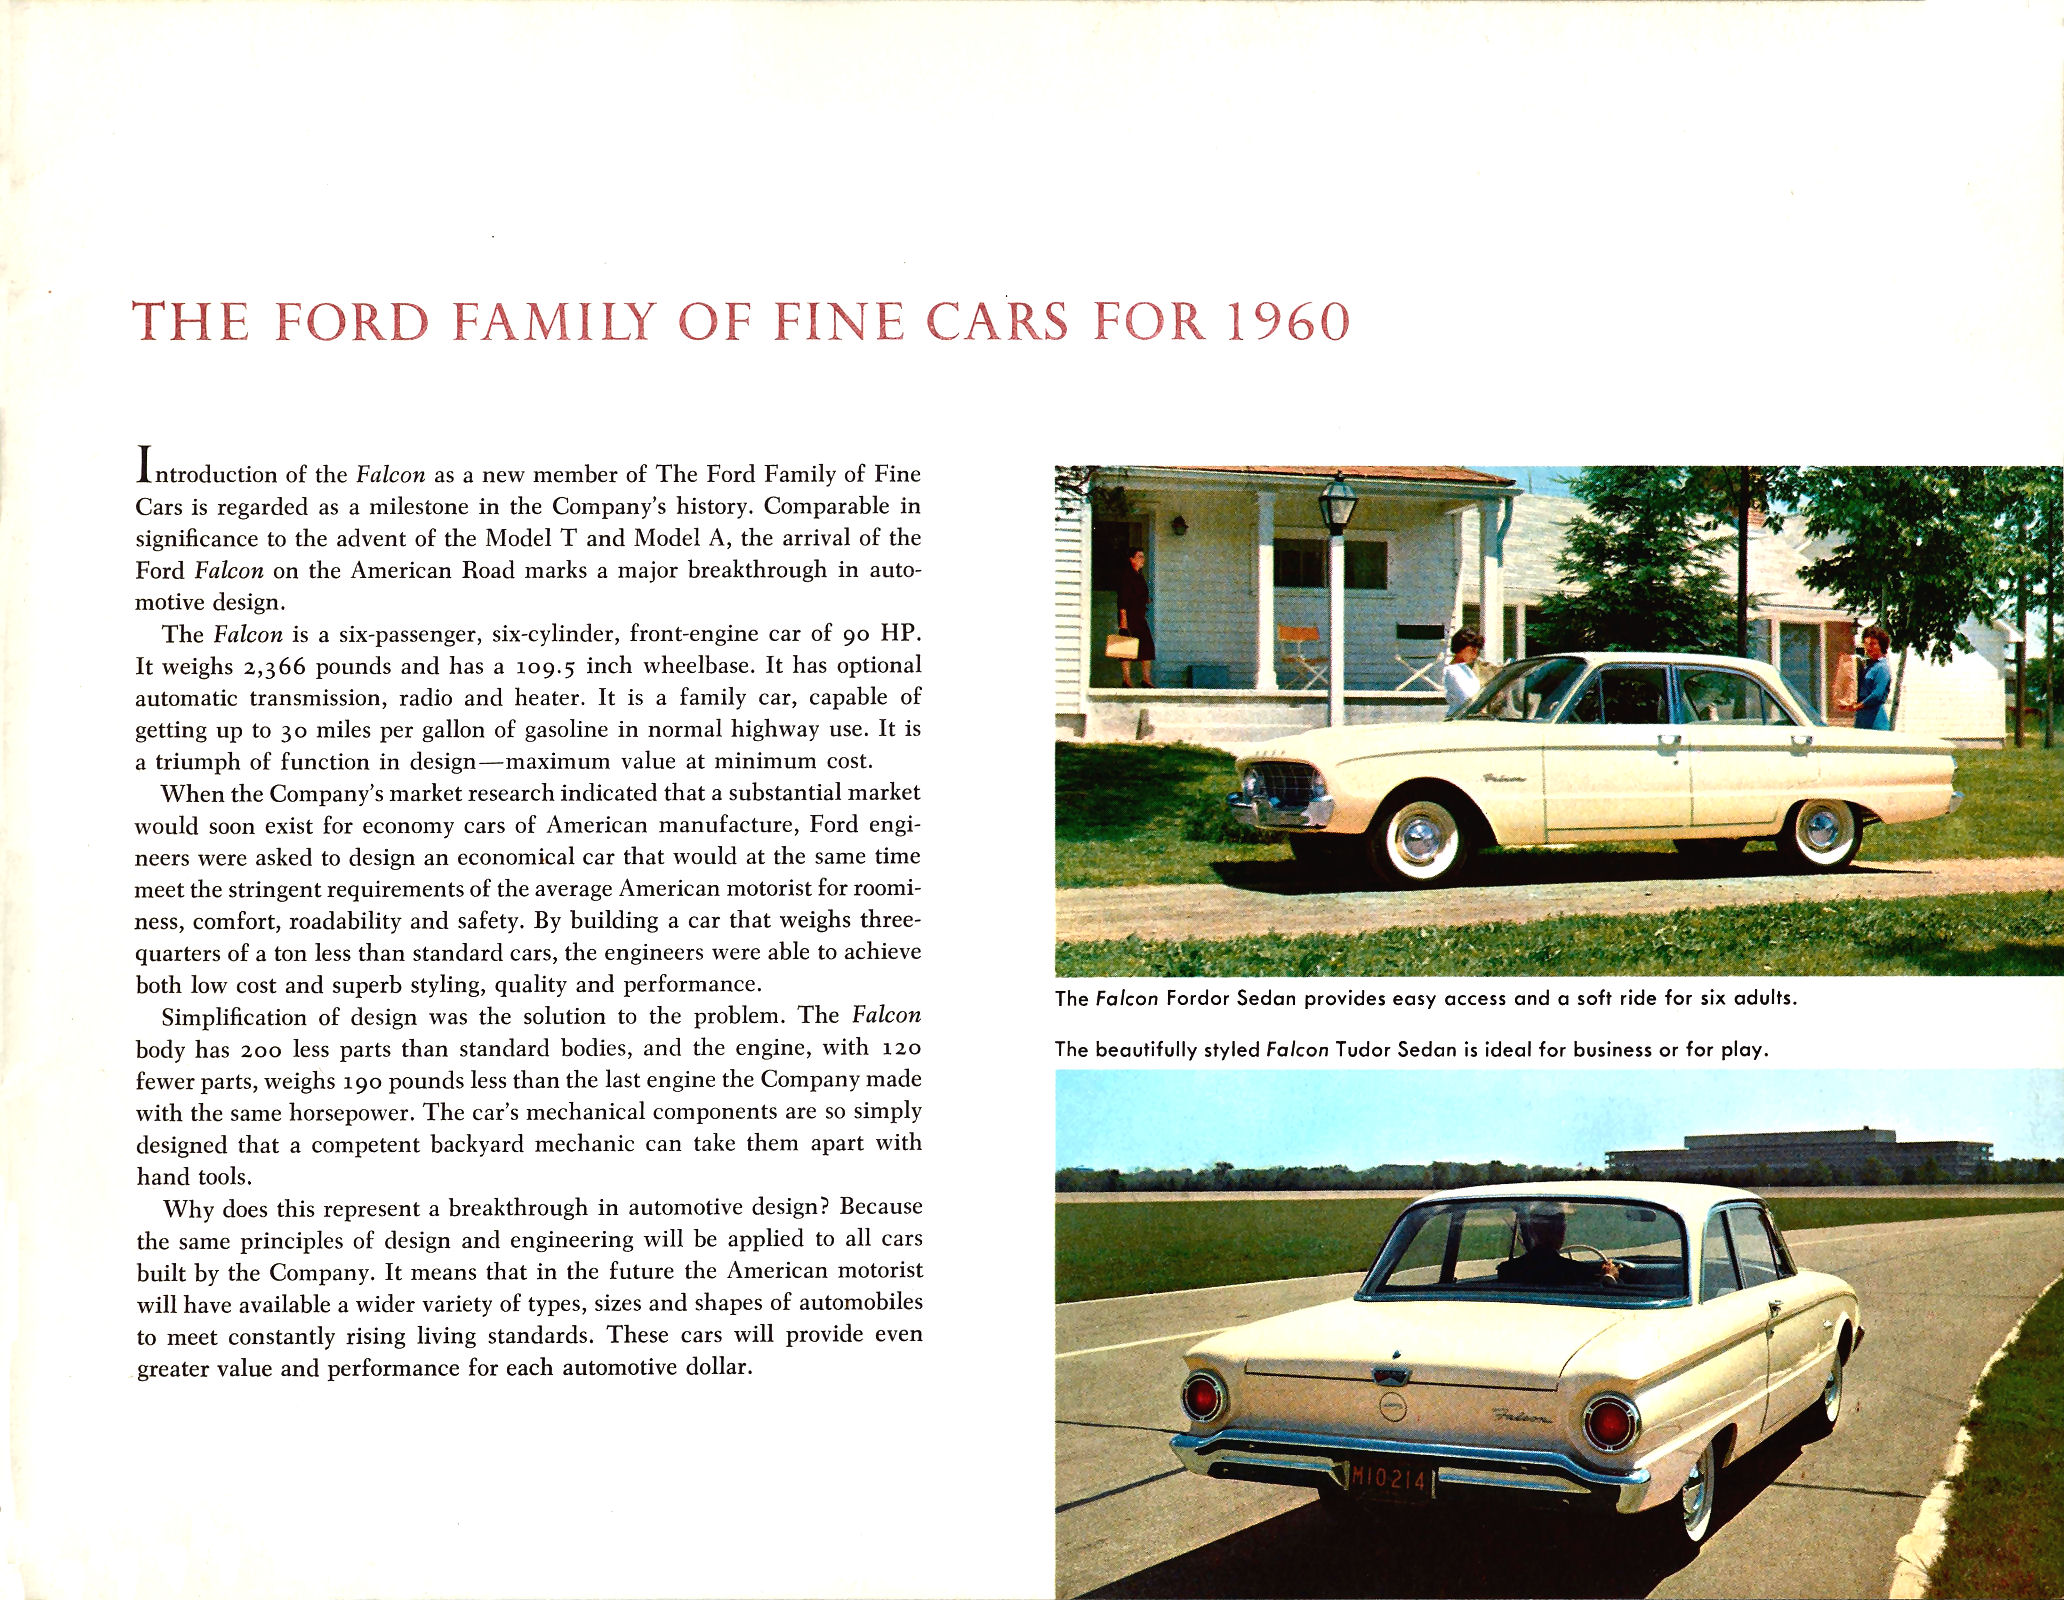 1960 Ford Family of Fine Cars-03